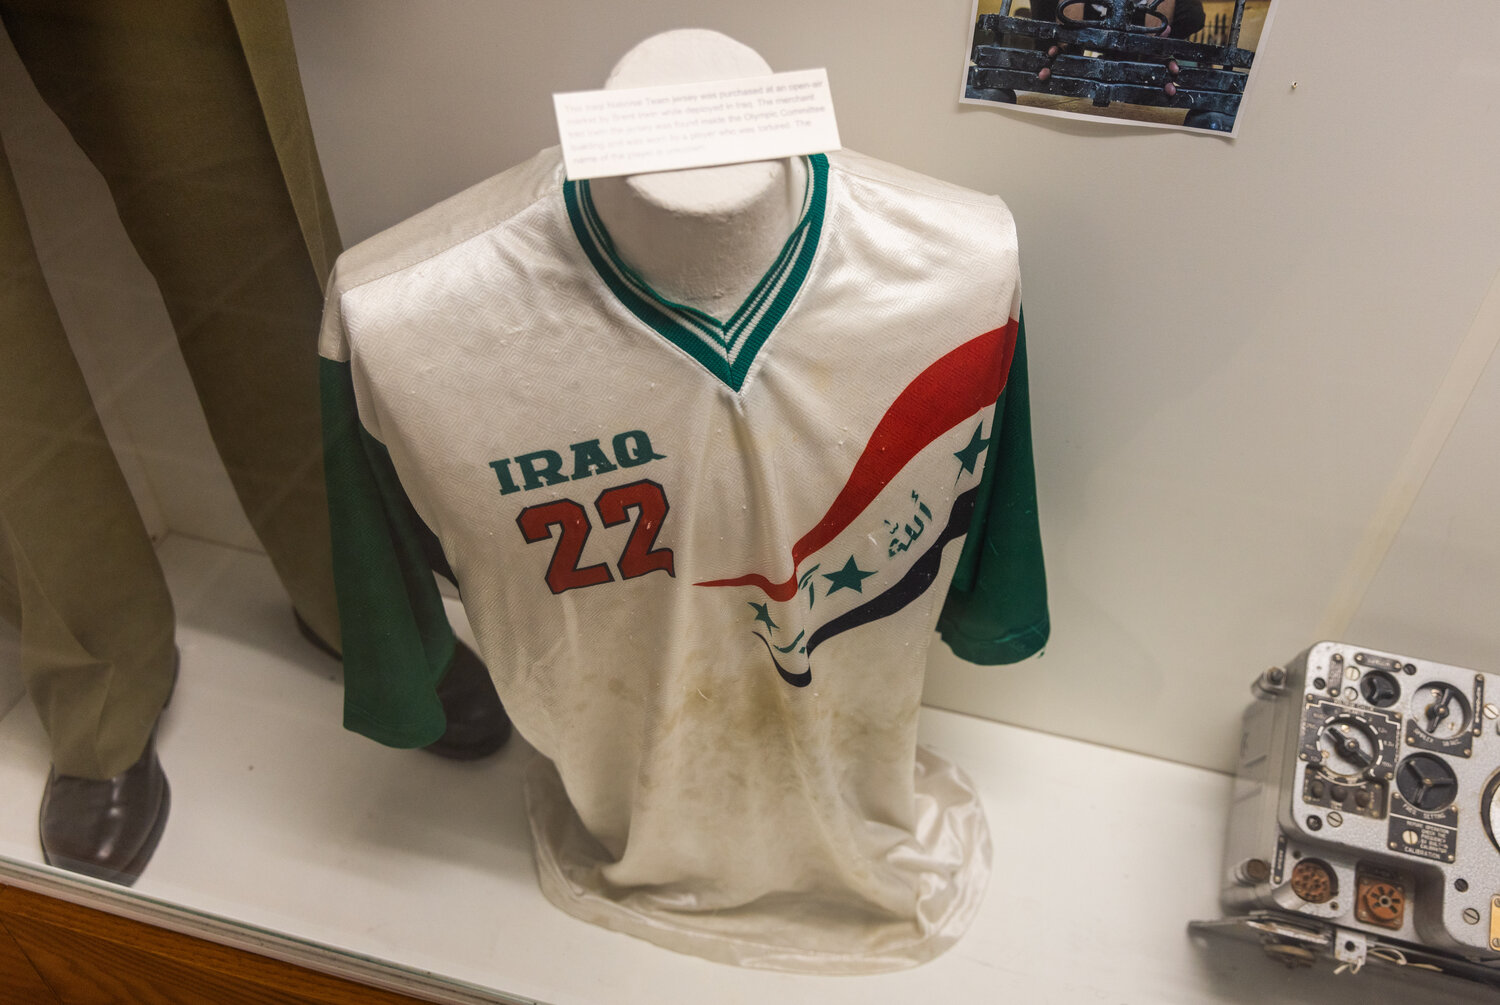 An authenticated outfit tailored for Saddam Hussein sits on display alongside a blood protein stained Iraq soccer jersey at the Veterans Memorial Museum in Chehalis on Tuesday, Nov. 14. Uday Hussein, the eldest son of Iraq’s President, directed punishments and torture for athletes after losing games. Iraq had the only Olympic headquarters in the world equipped with its own prison.